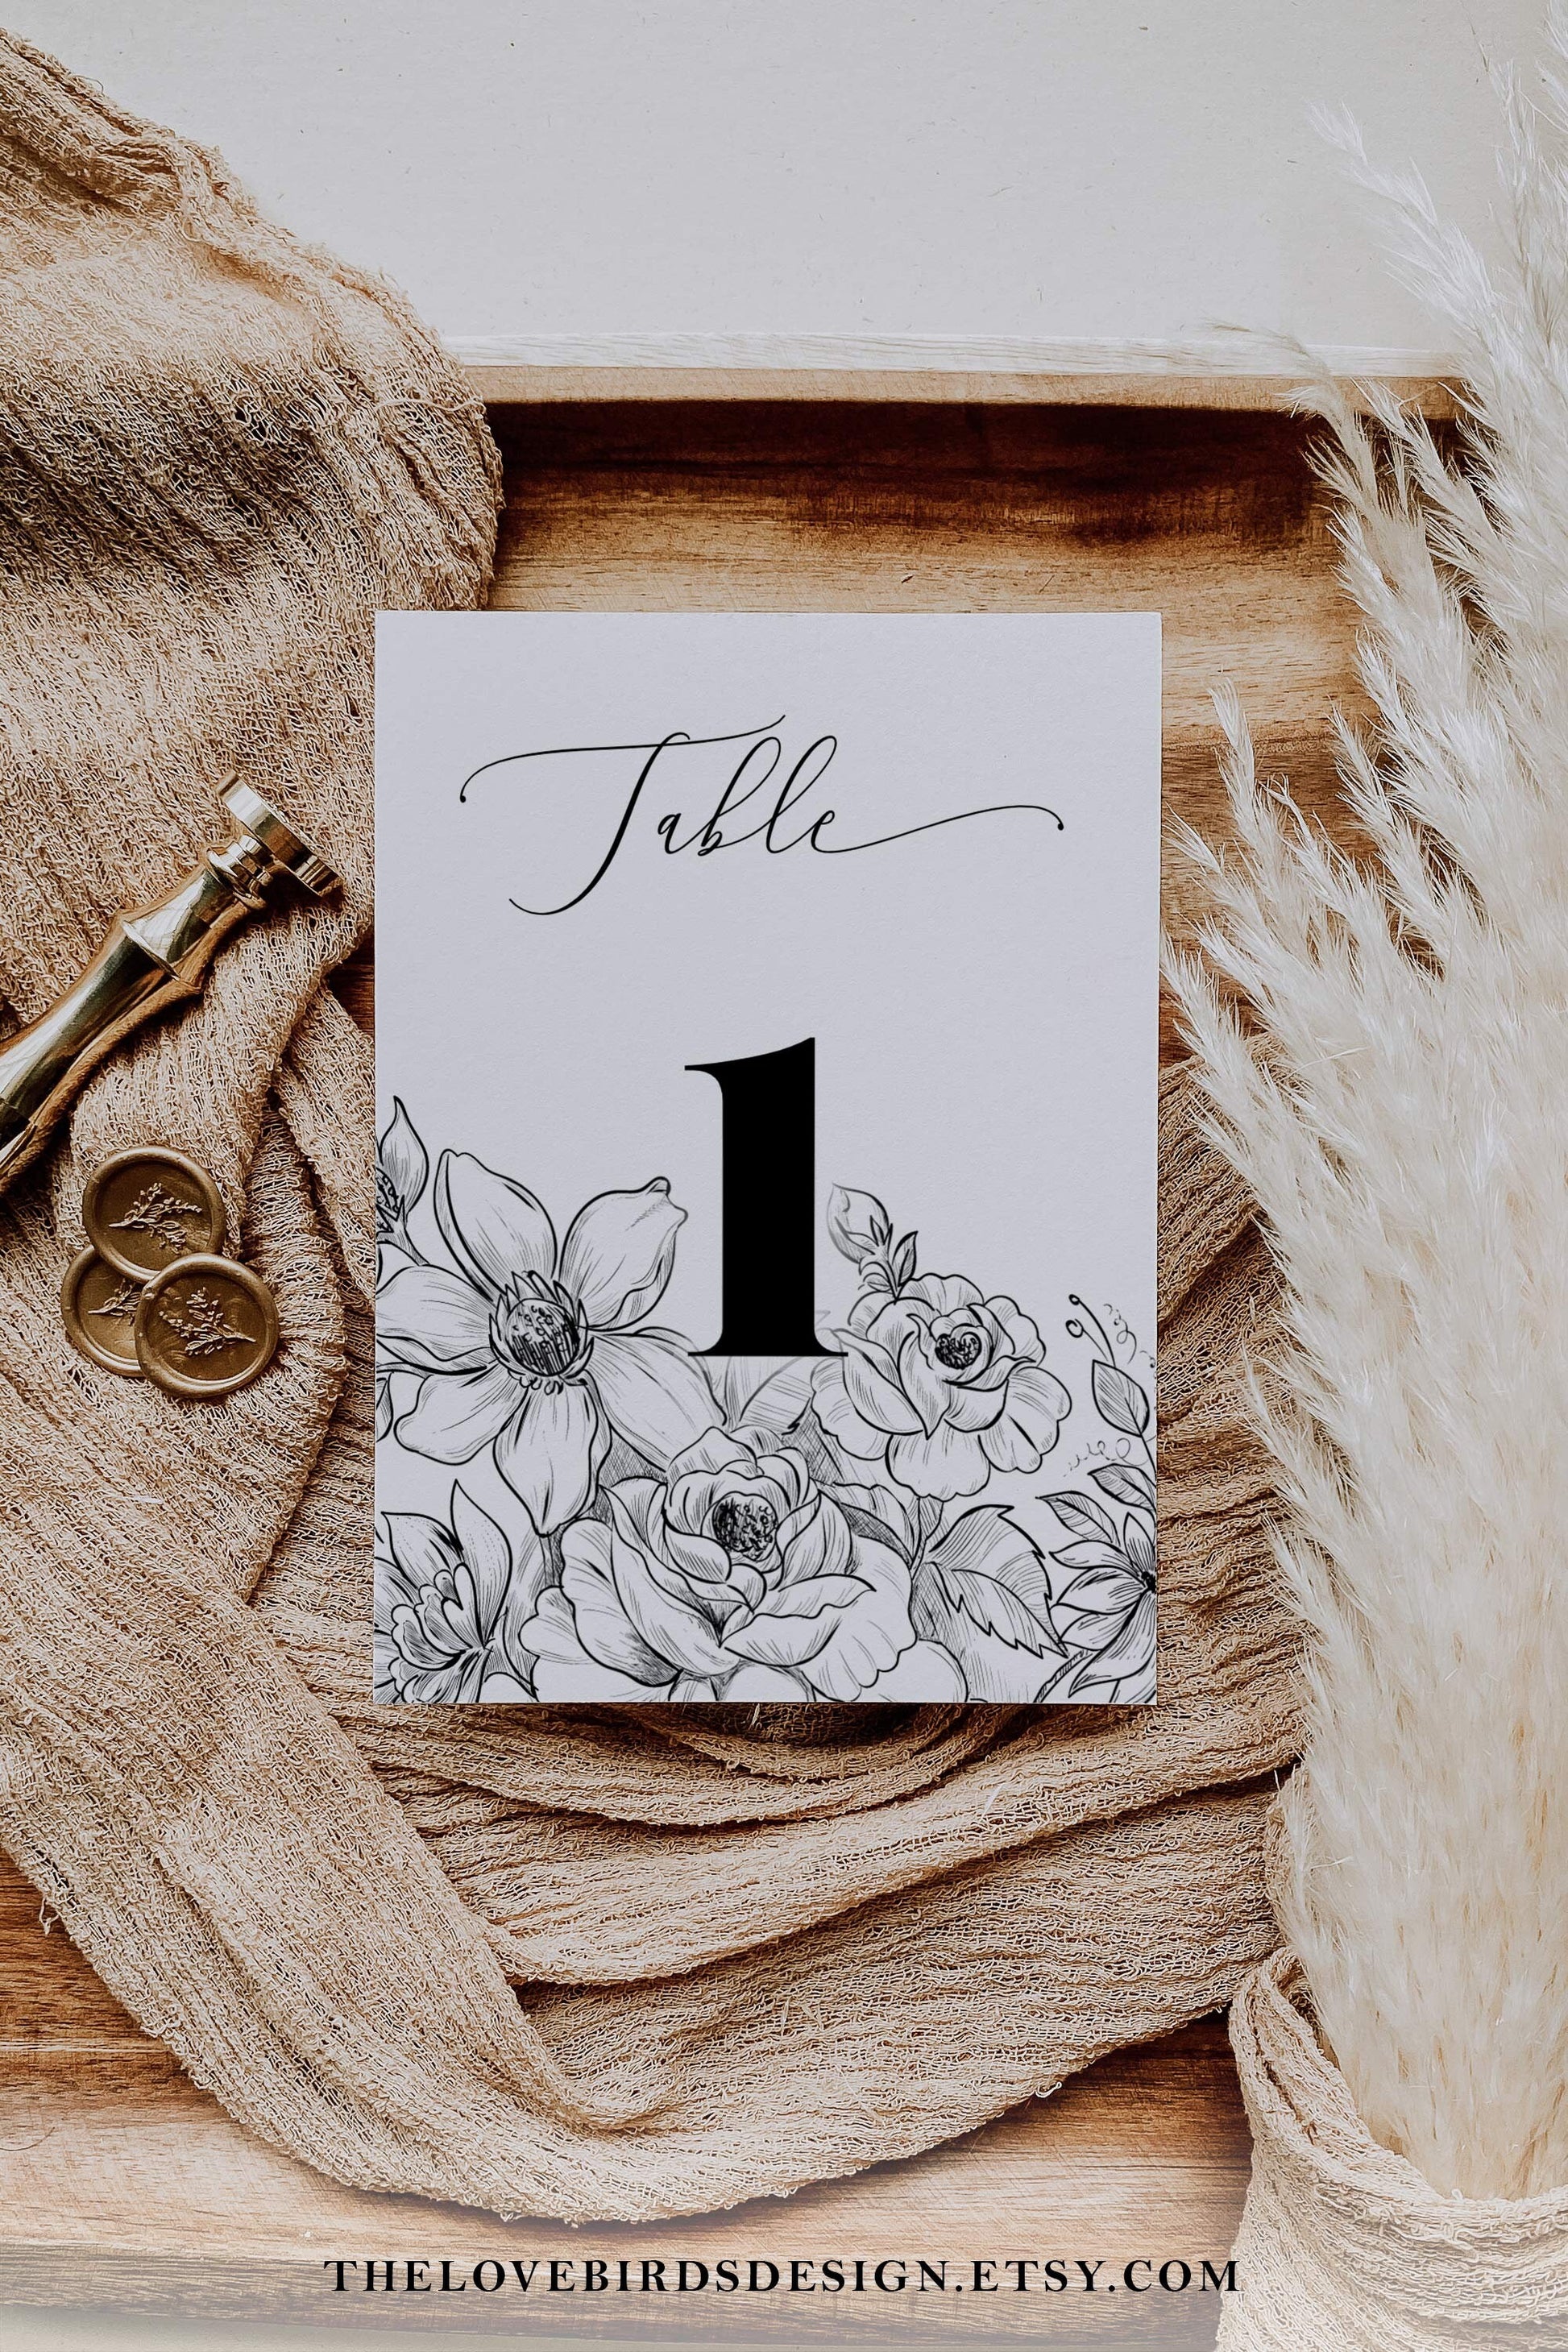 Gothic Wedding Table Numbers Sign, Rock n Roll Wedding Decor for Minimalist Party